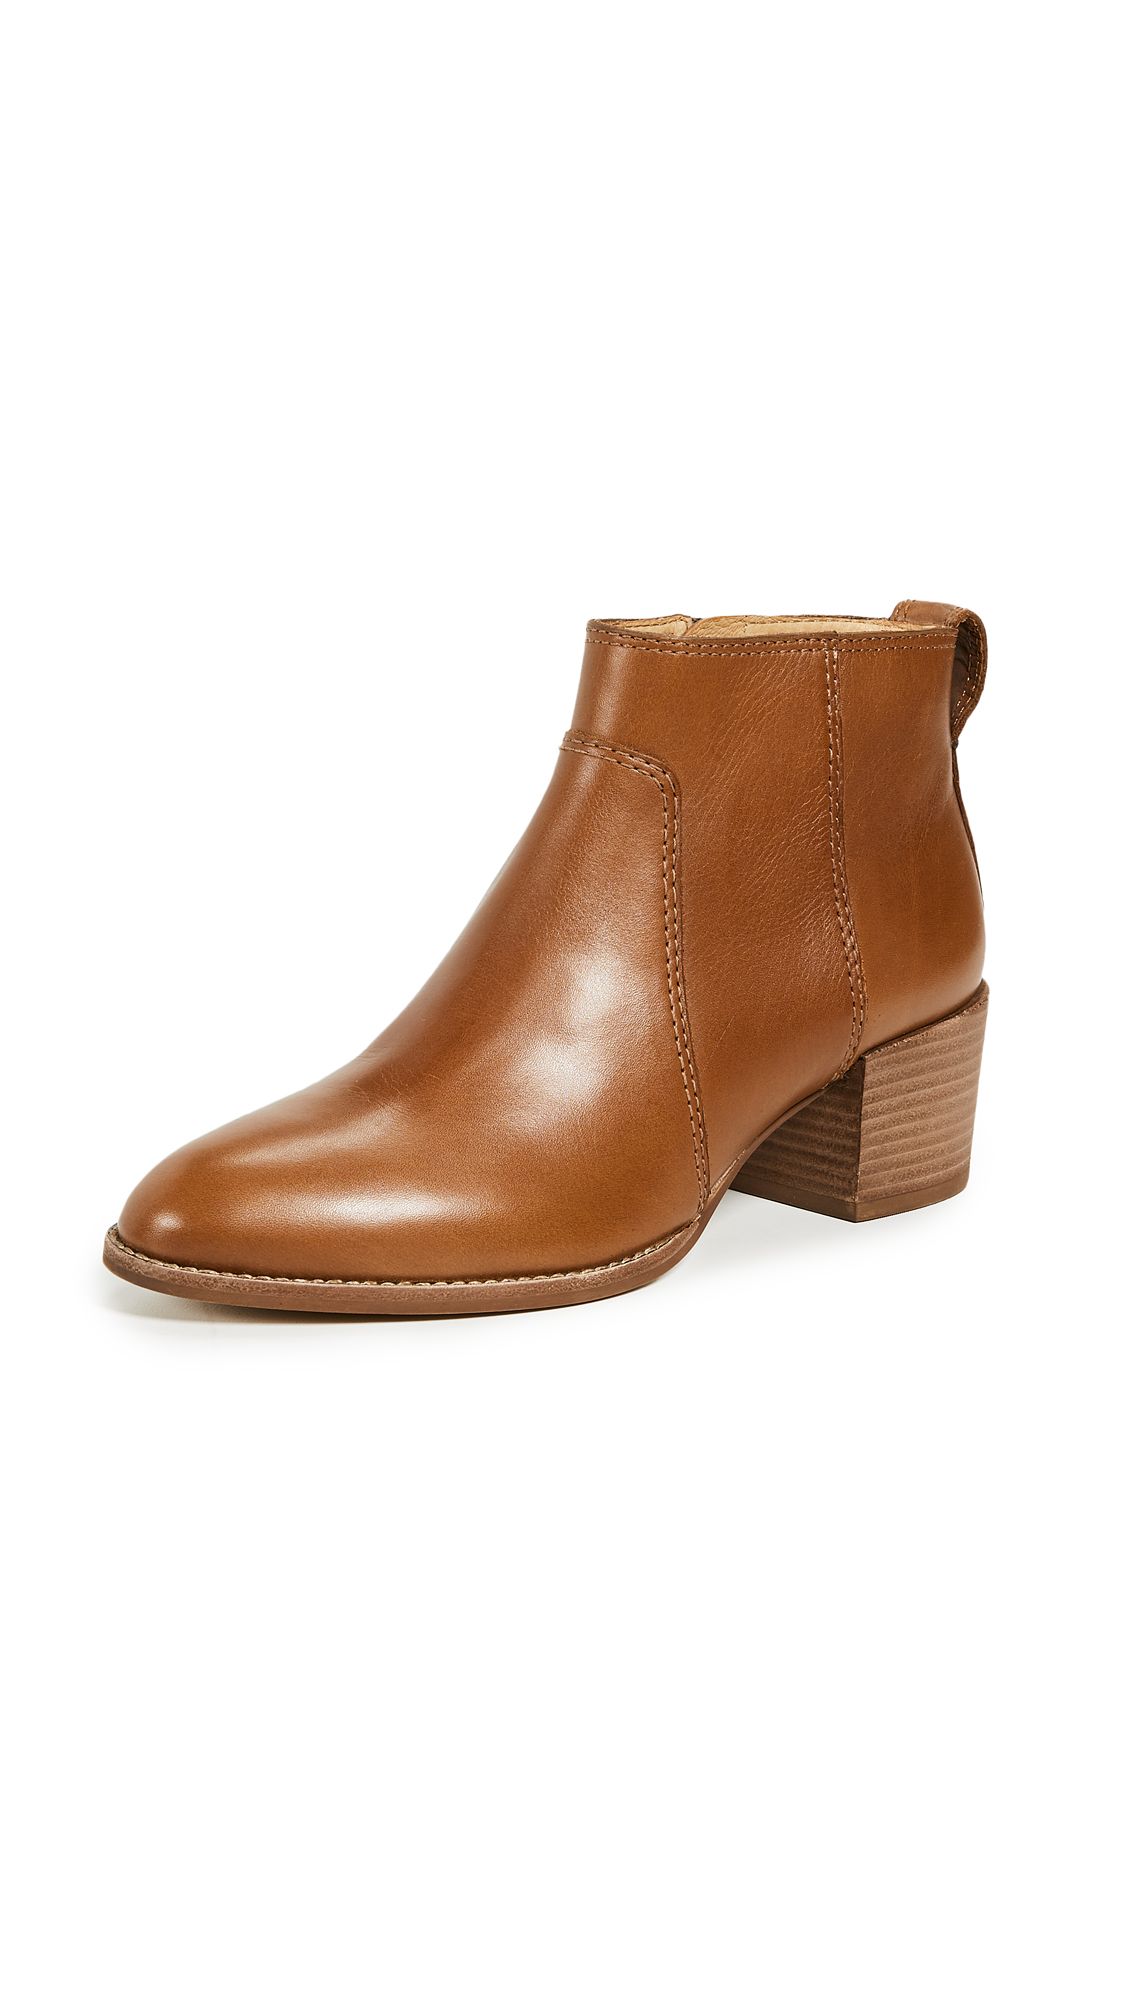 Madewell The Asher Boot | Shopbop